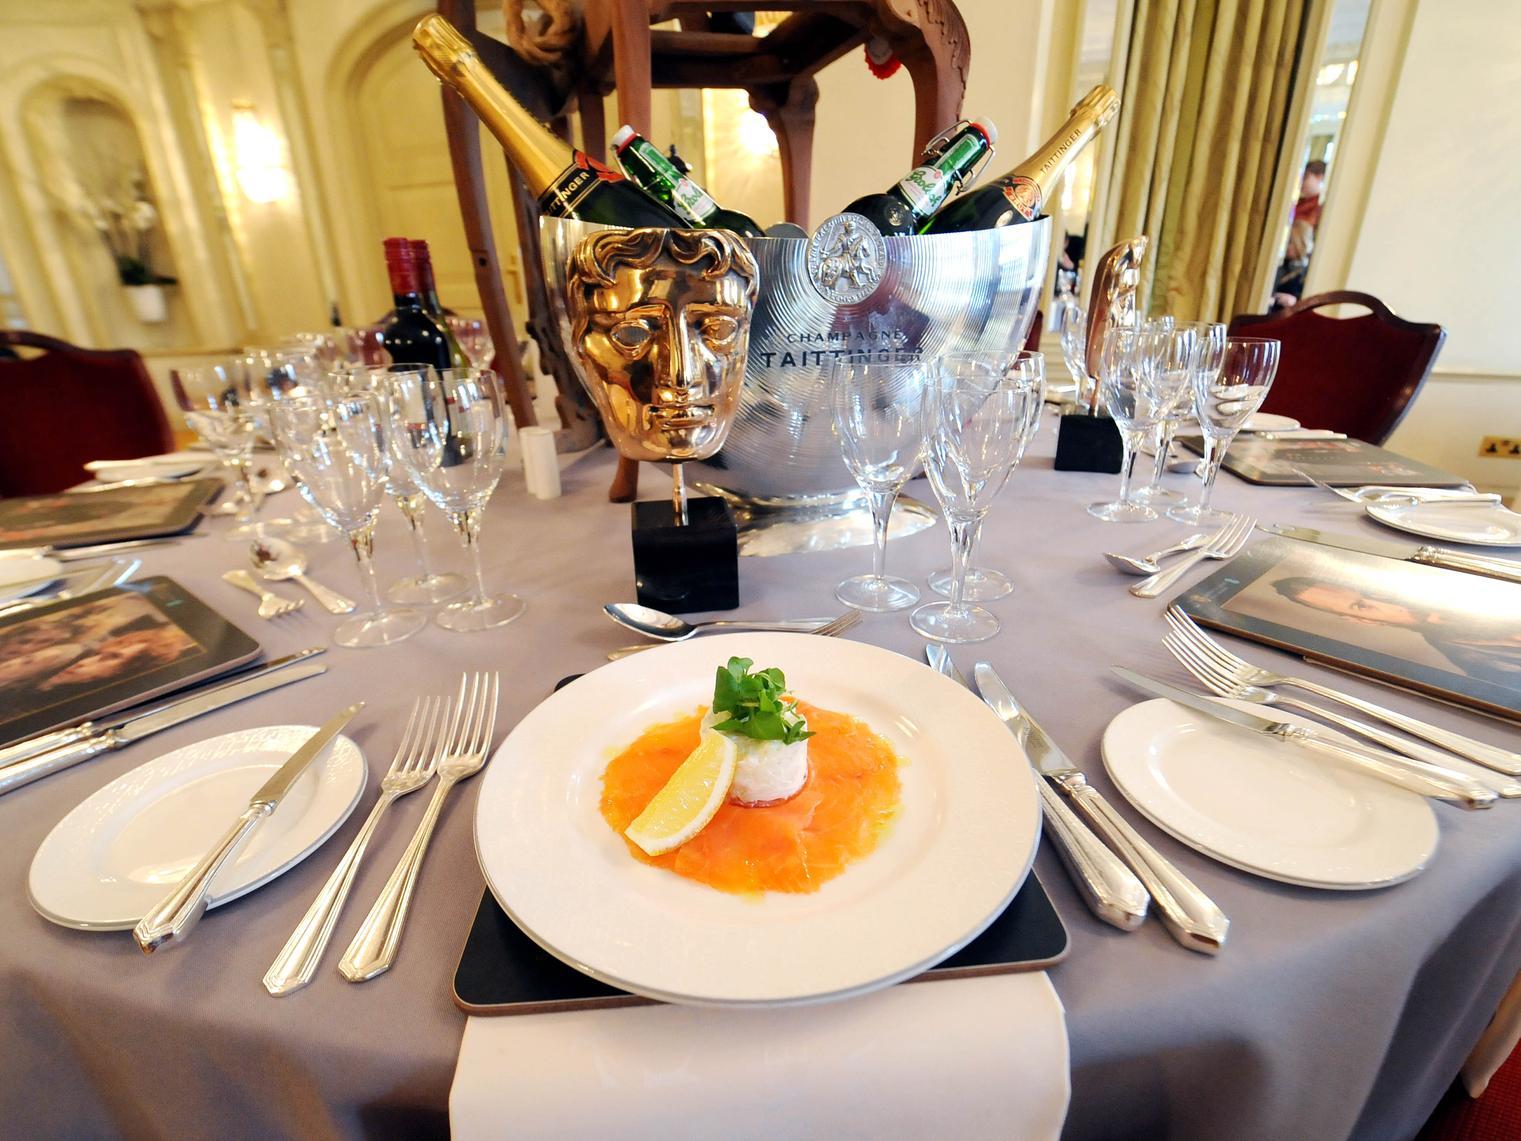 The best fine dining spots in Northamptonshire have been revealed. Photo: Getty Images.